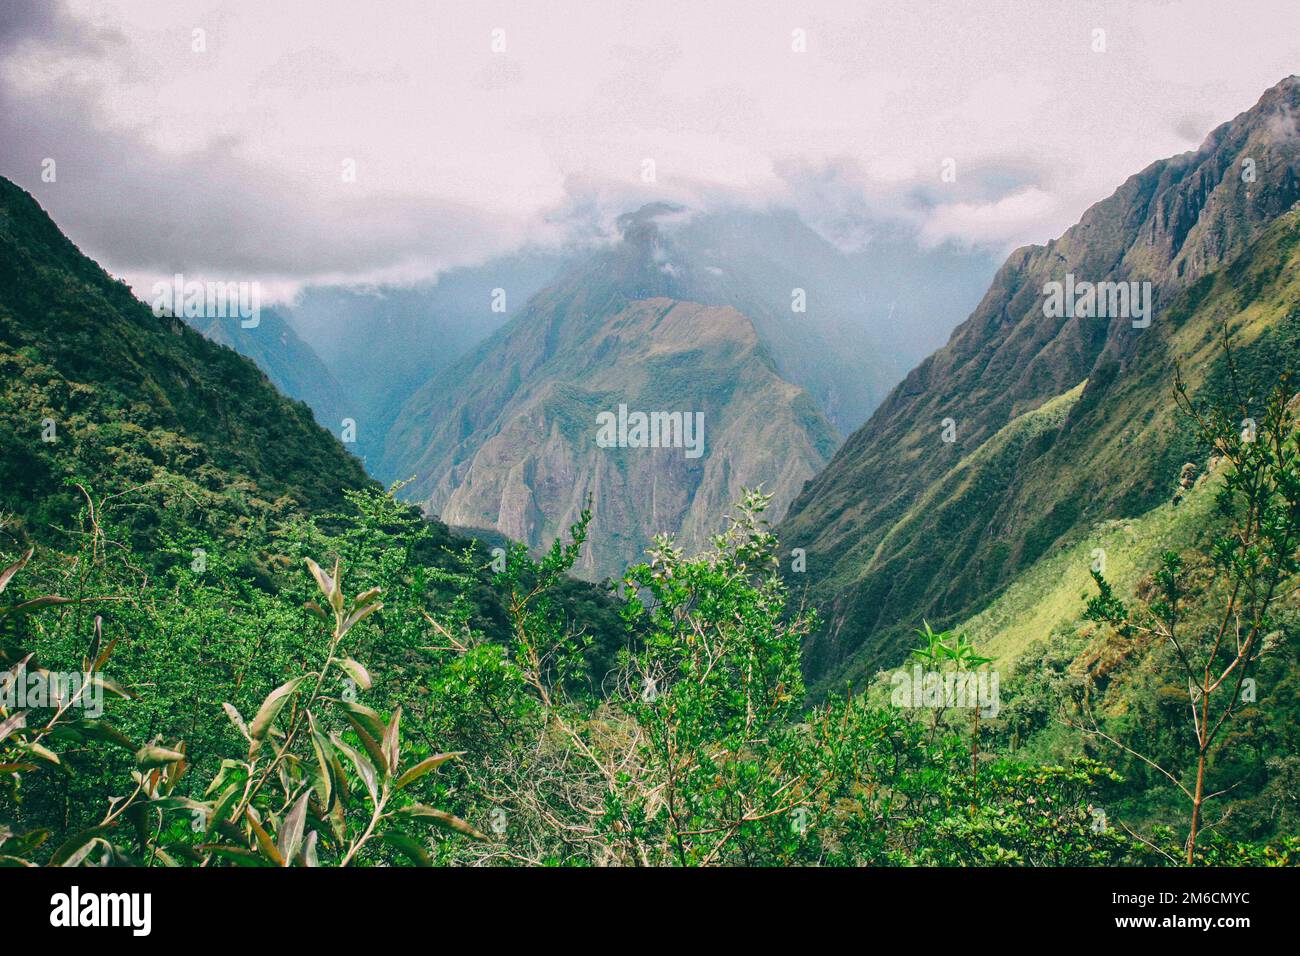 The green nature of the Andes. Stock Photo